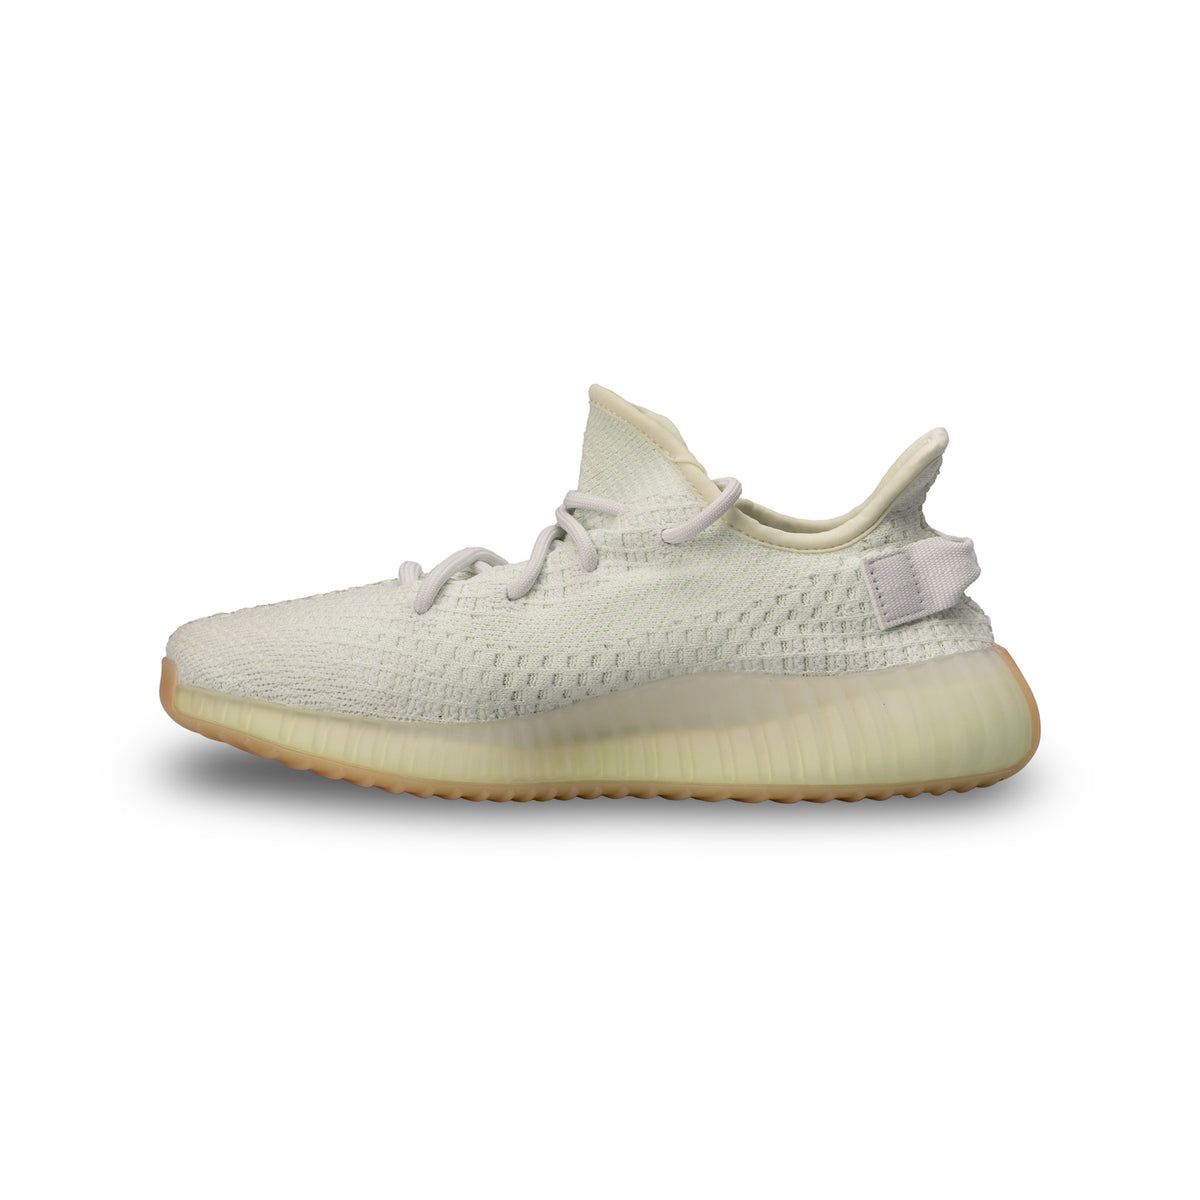 Yeezy Boost 350 v2 Hyperspace